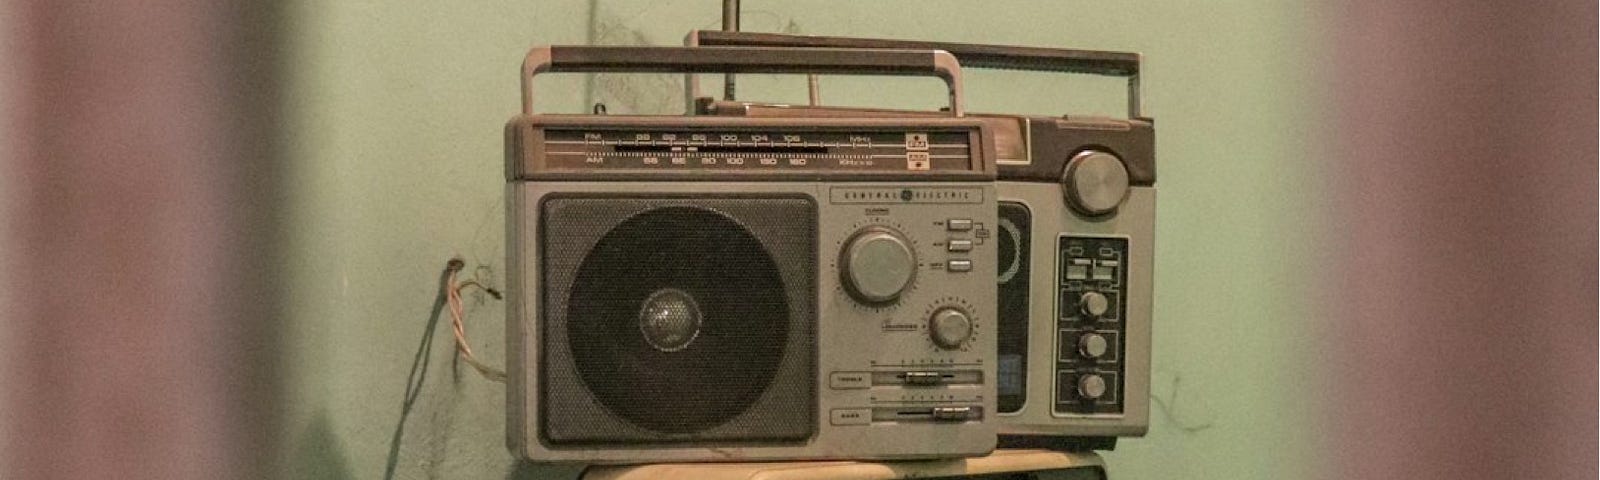 A grainy photograph of a transistor radio sitting atop an old television in a run-down room.